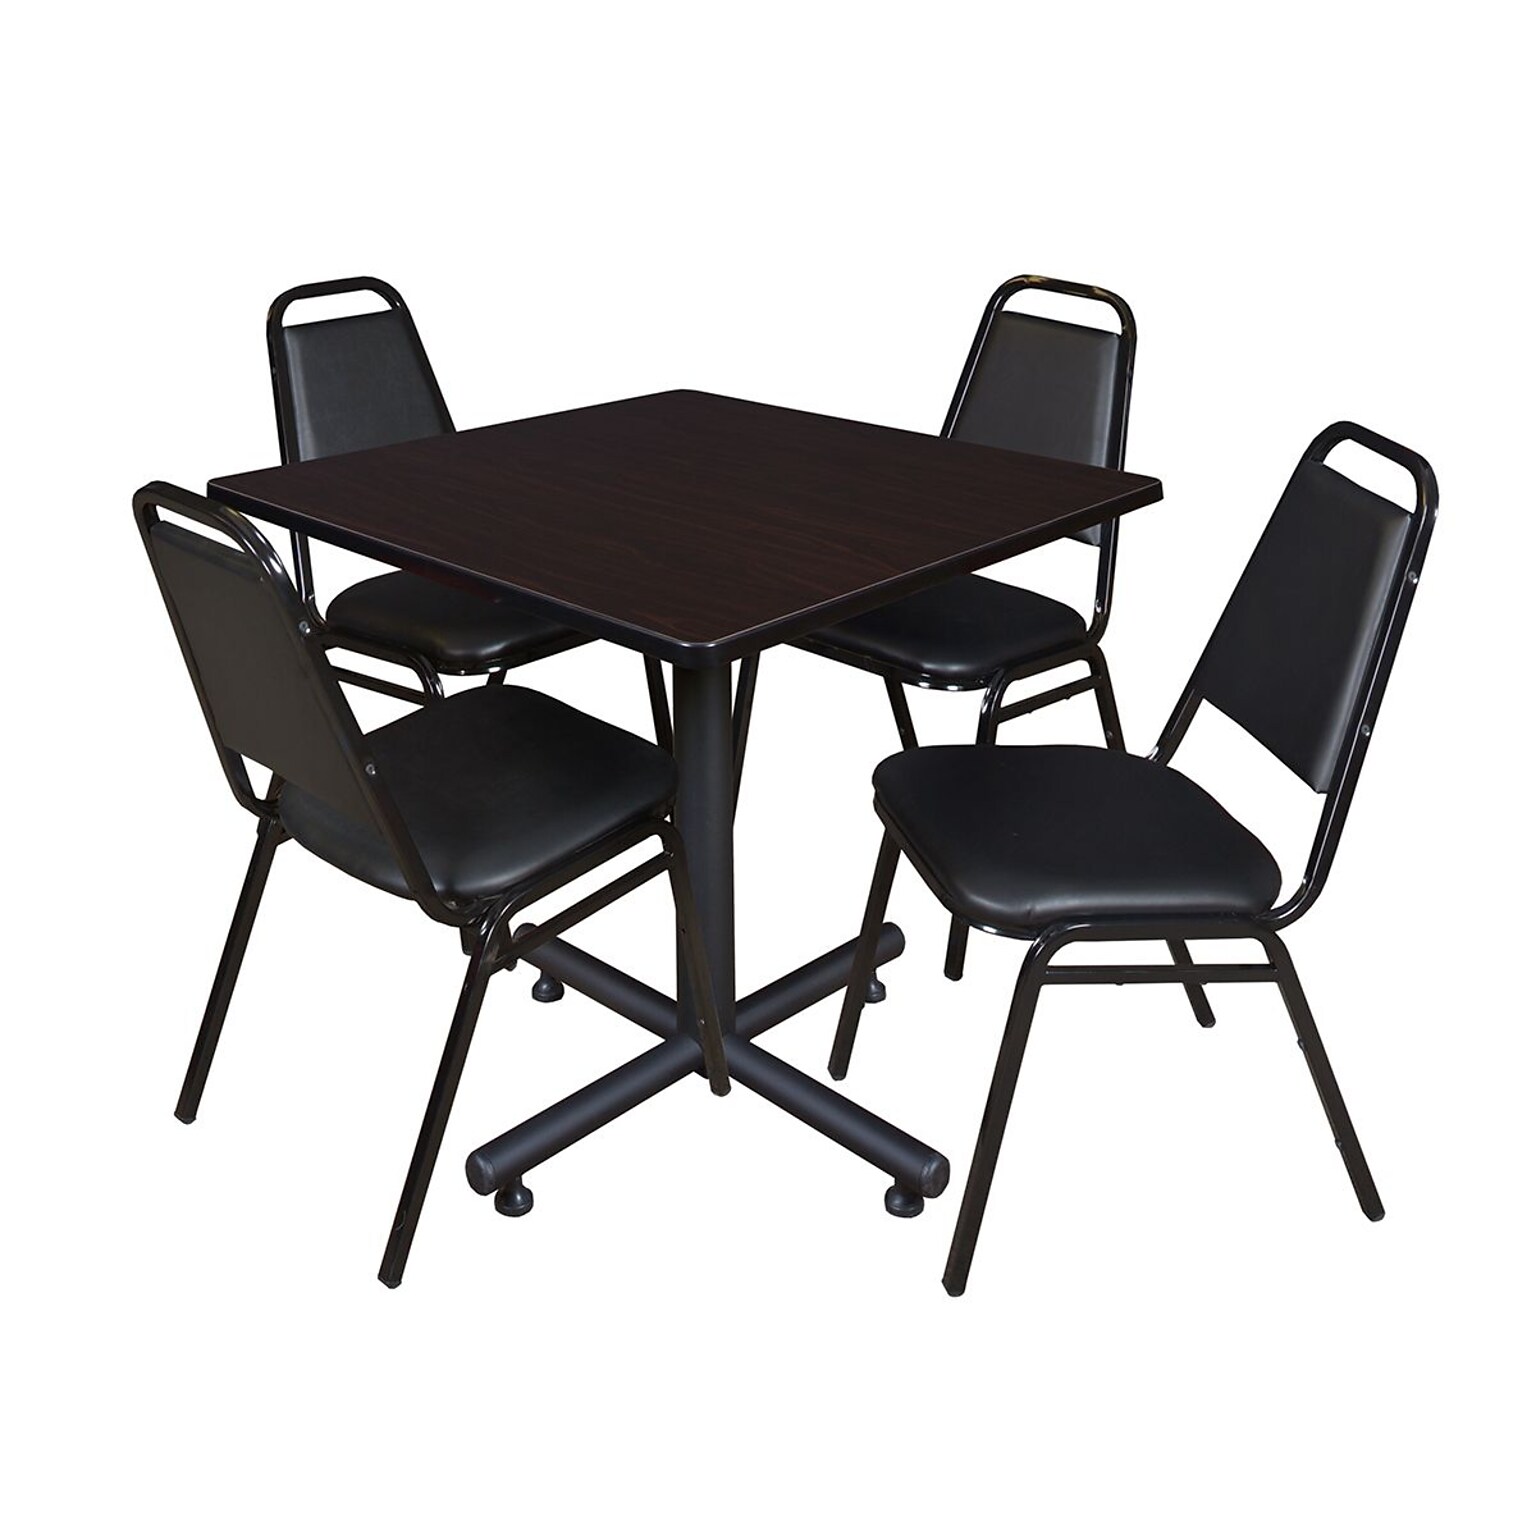 Regency 42 Laminate Square Table with 4 Restaurant Stack Chairs, Mocha Walnut with Beige and Kobe Base (TKB4242MW29)